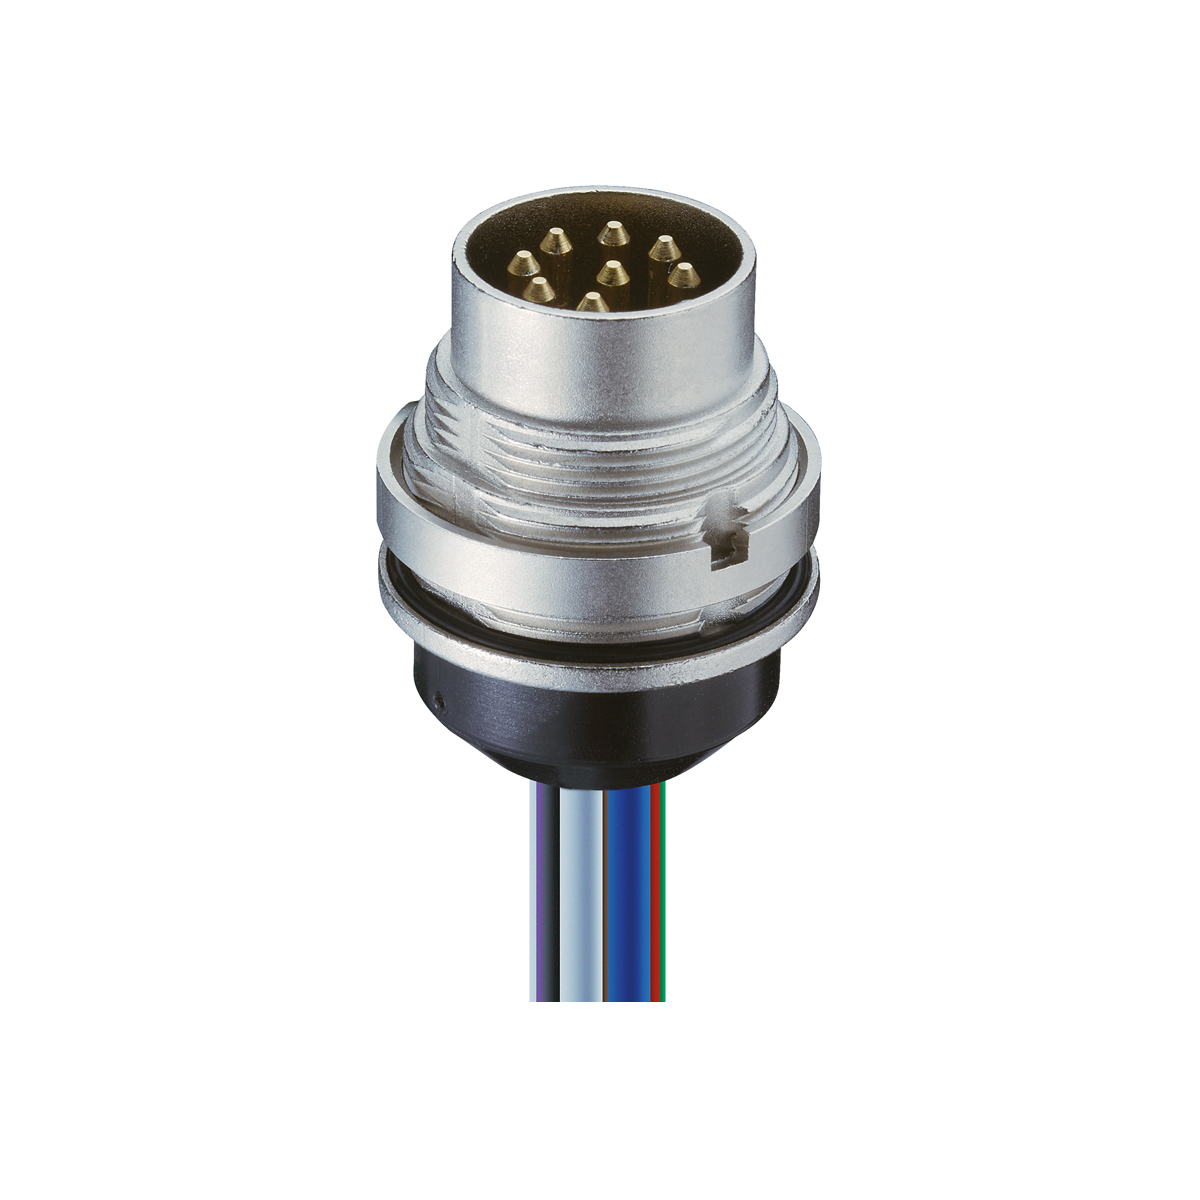 Lumberg: 0315-1 U (Series 03 | Circular connectors with threaded joint M16 acc. to IEC 61076-2-106, IP40/IP68)